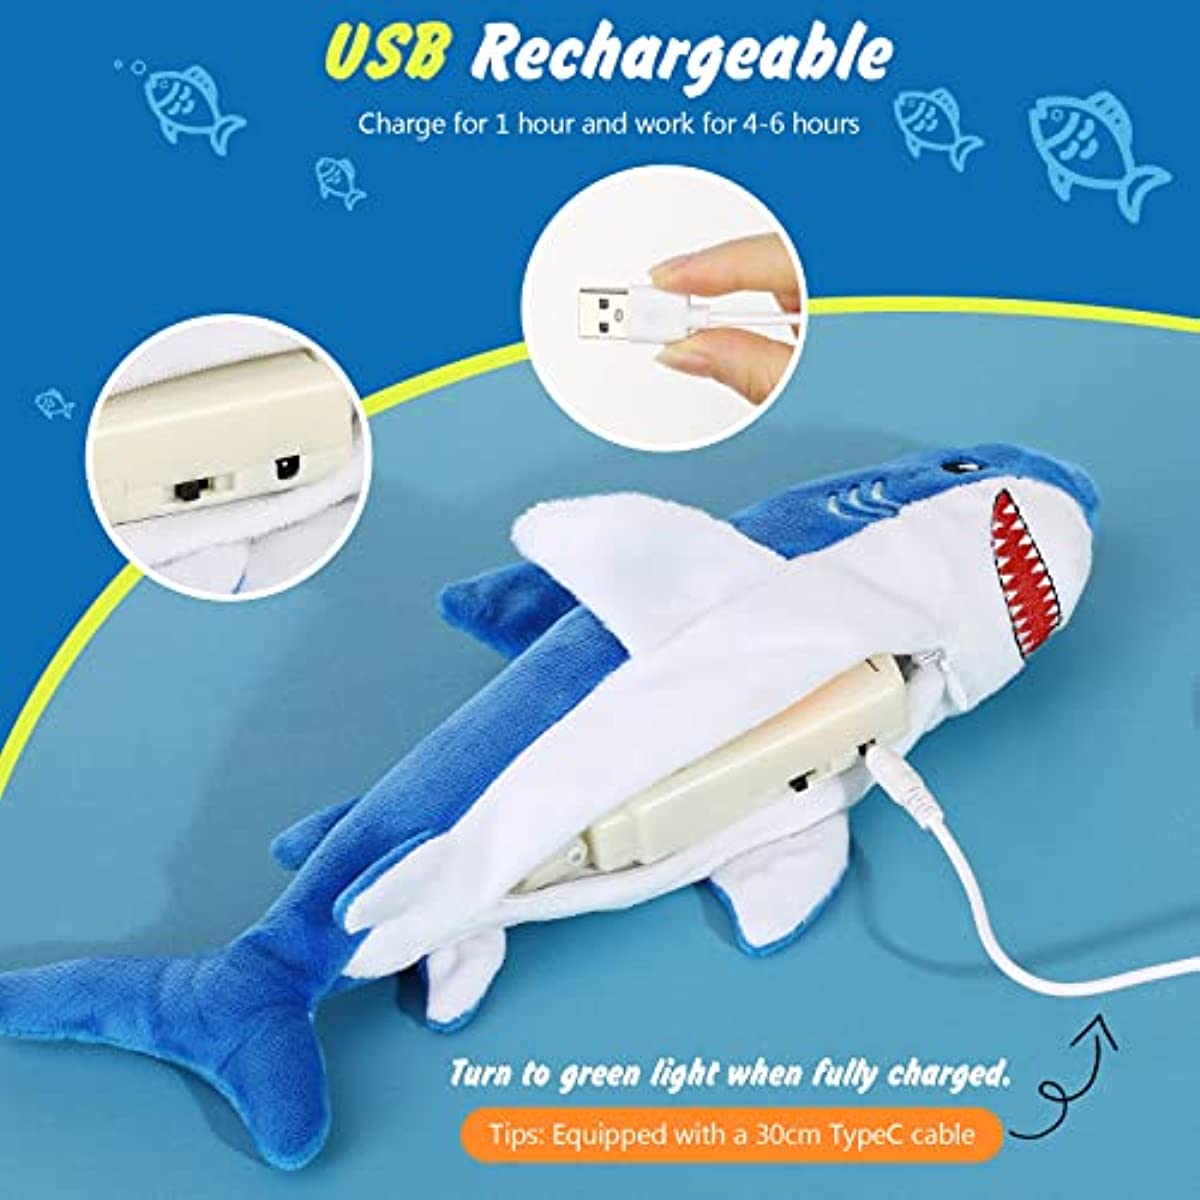 Rechargeable Squeaker Dog Toys